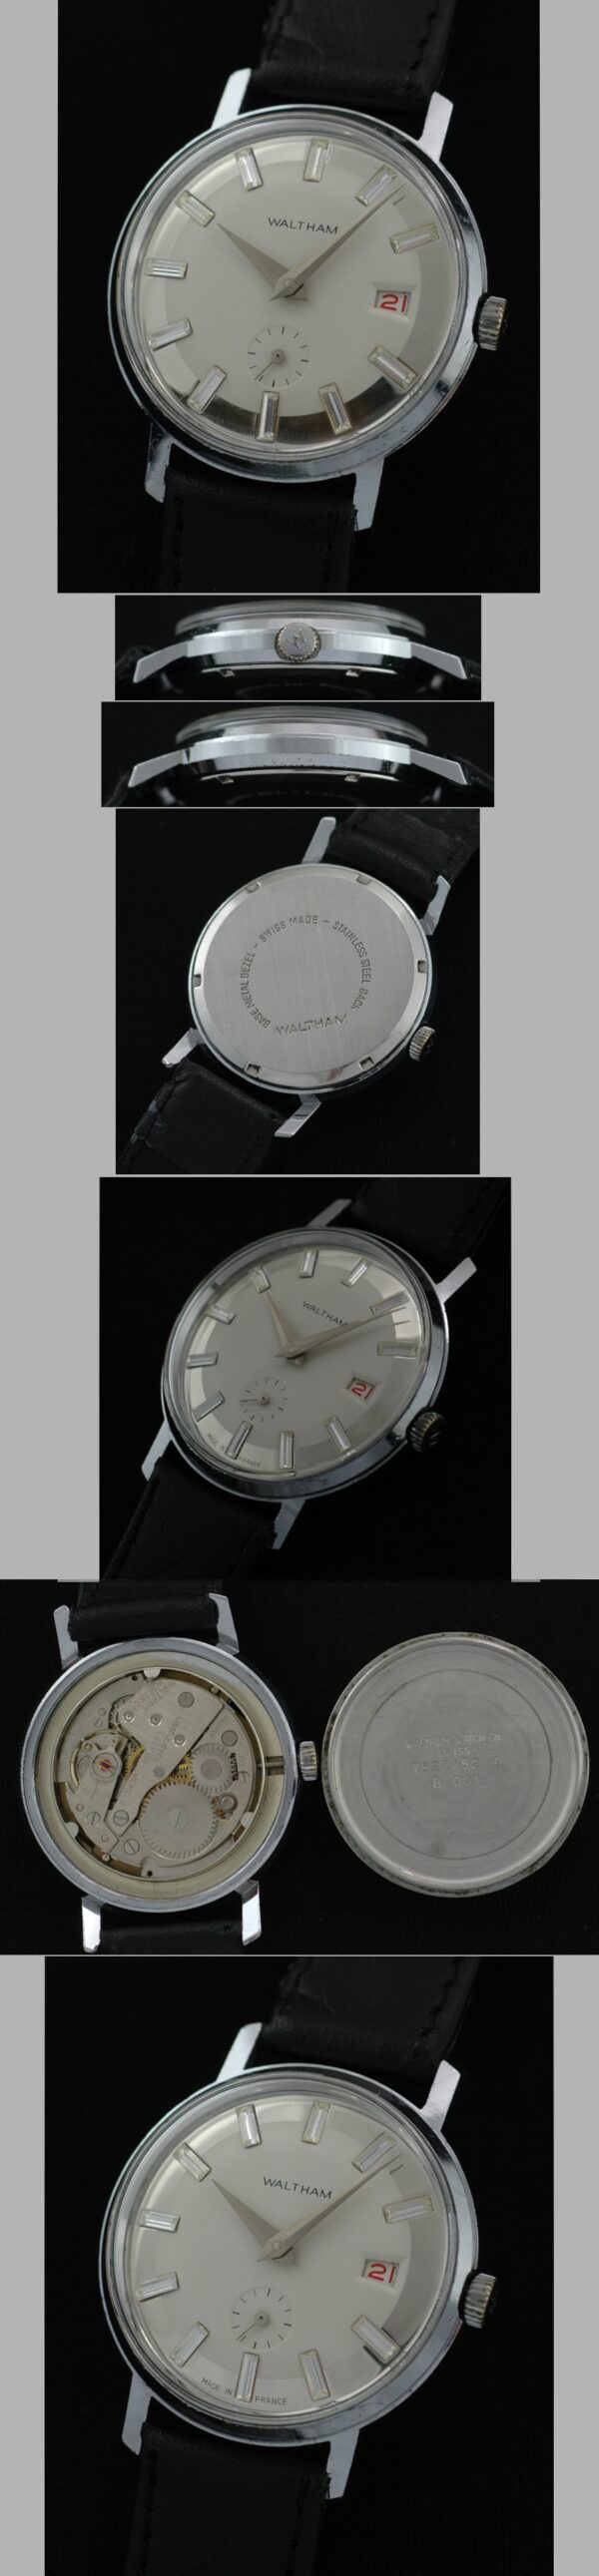 1960s Waltham stainless steel watch with original mirror-edge dial, roulette date, Dauphine hands, sweep seconds, and clean manual movement.